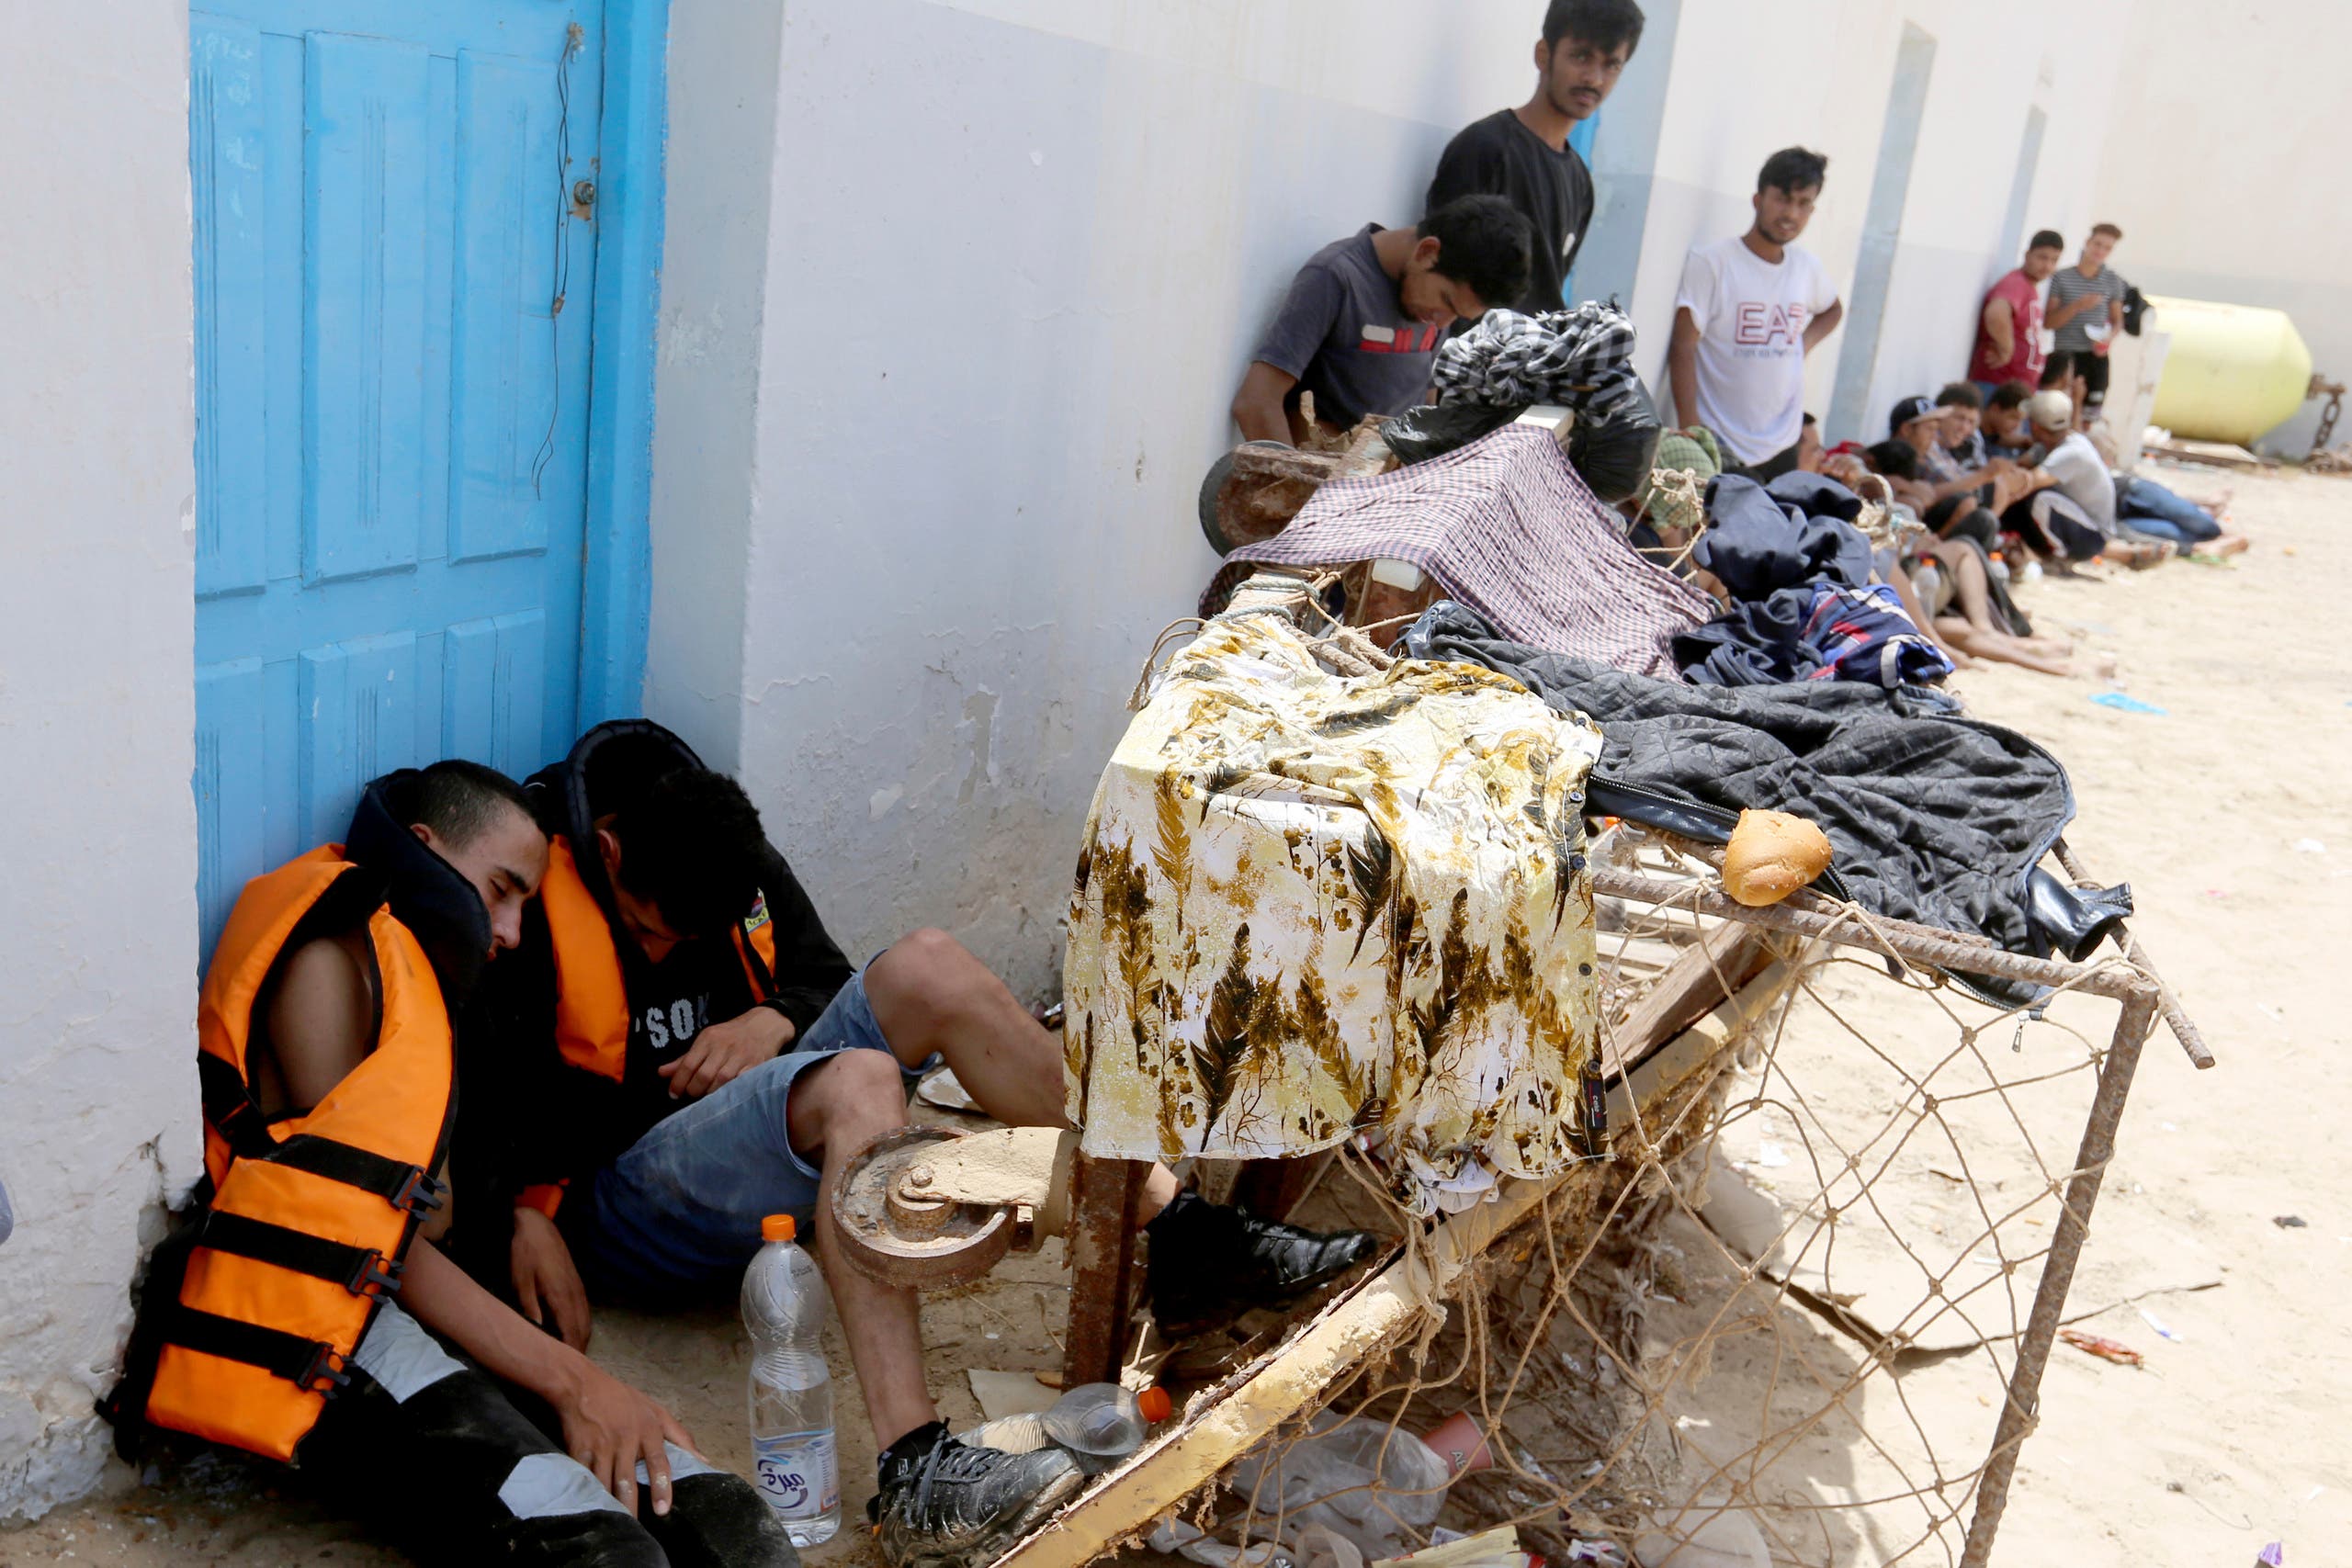 Migrants detained in Libya (archive - The Associated Press)